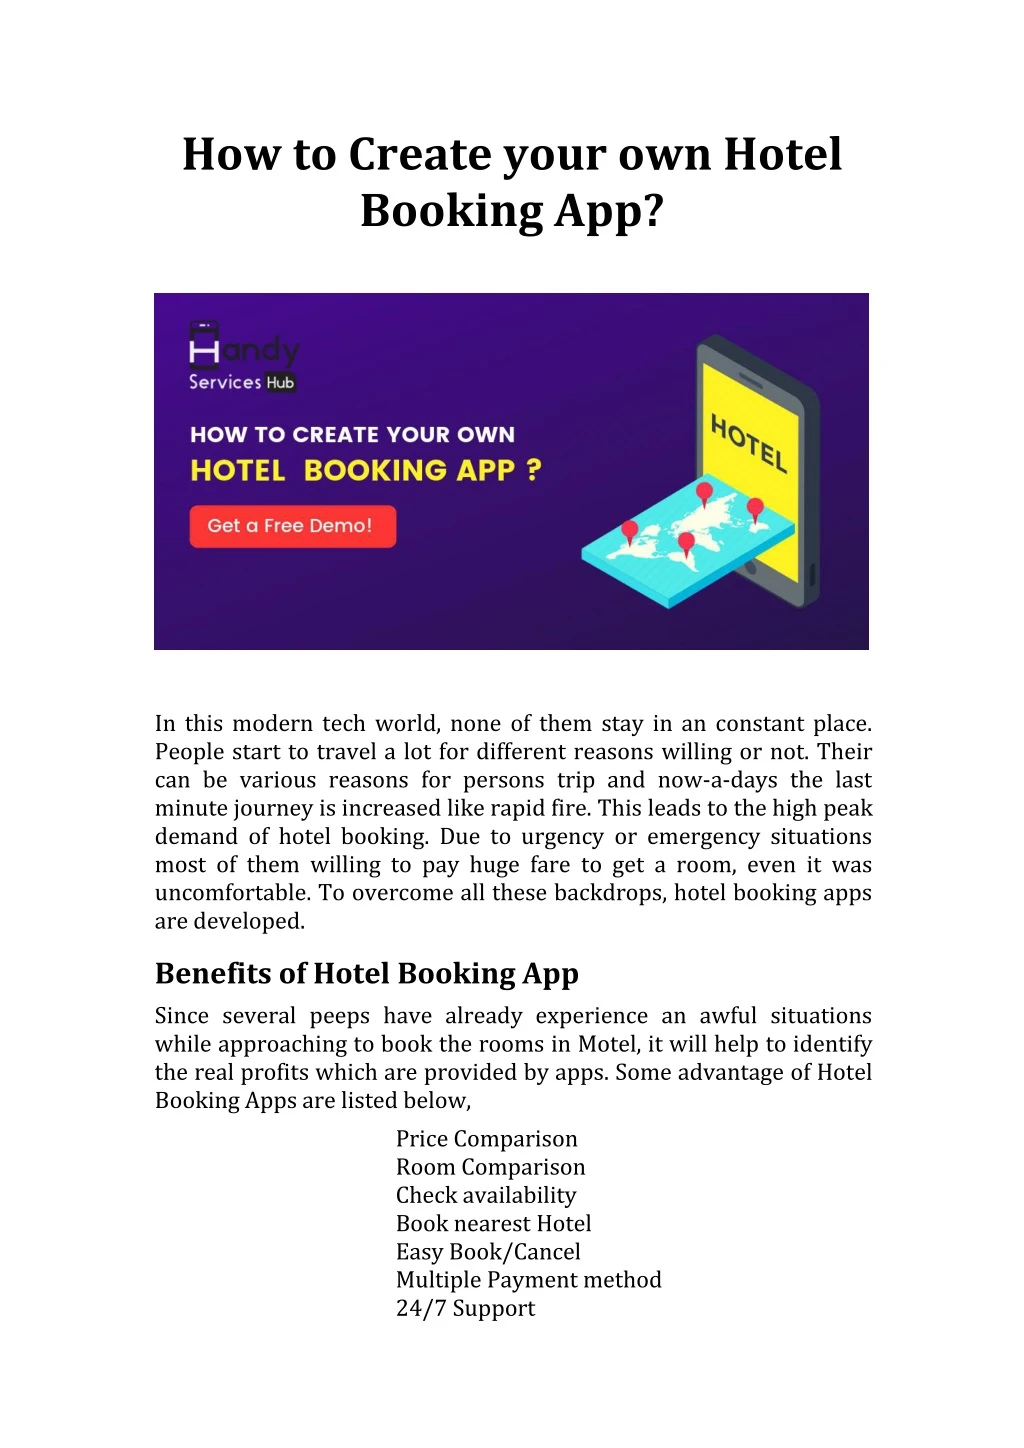 how to create your own hotel booking app